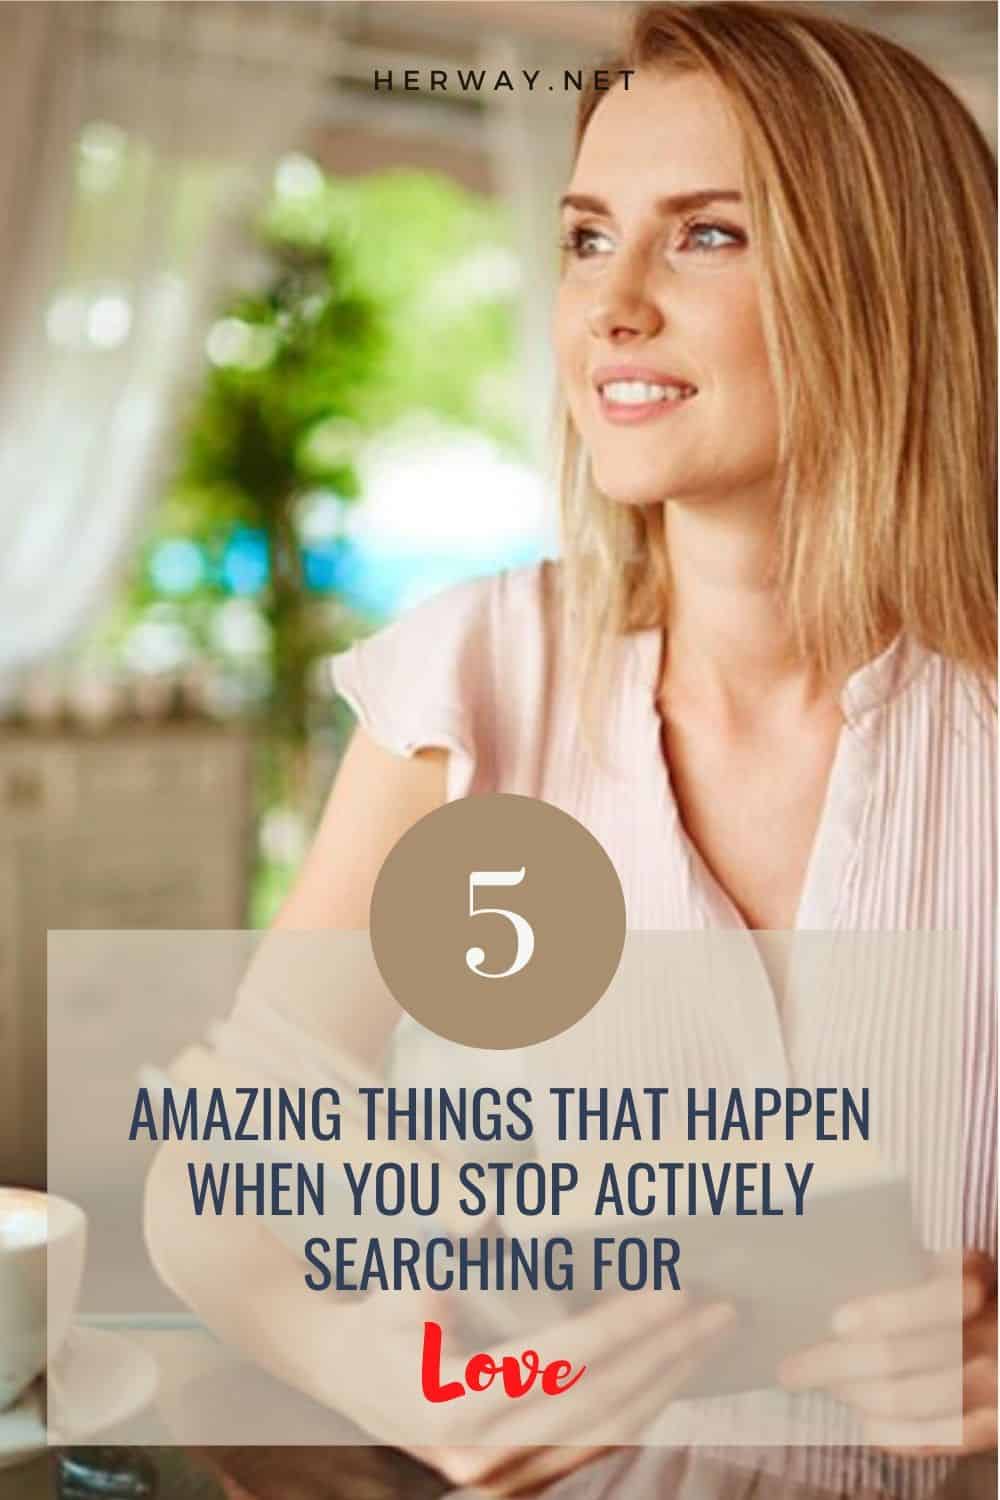 5 Amazing Things That Happen When You Stop Actively Searching For Love